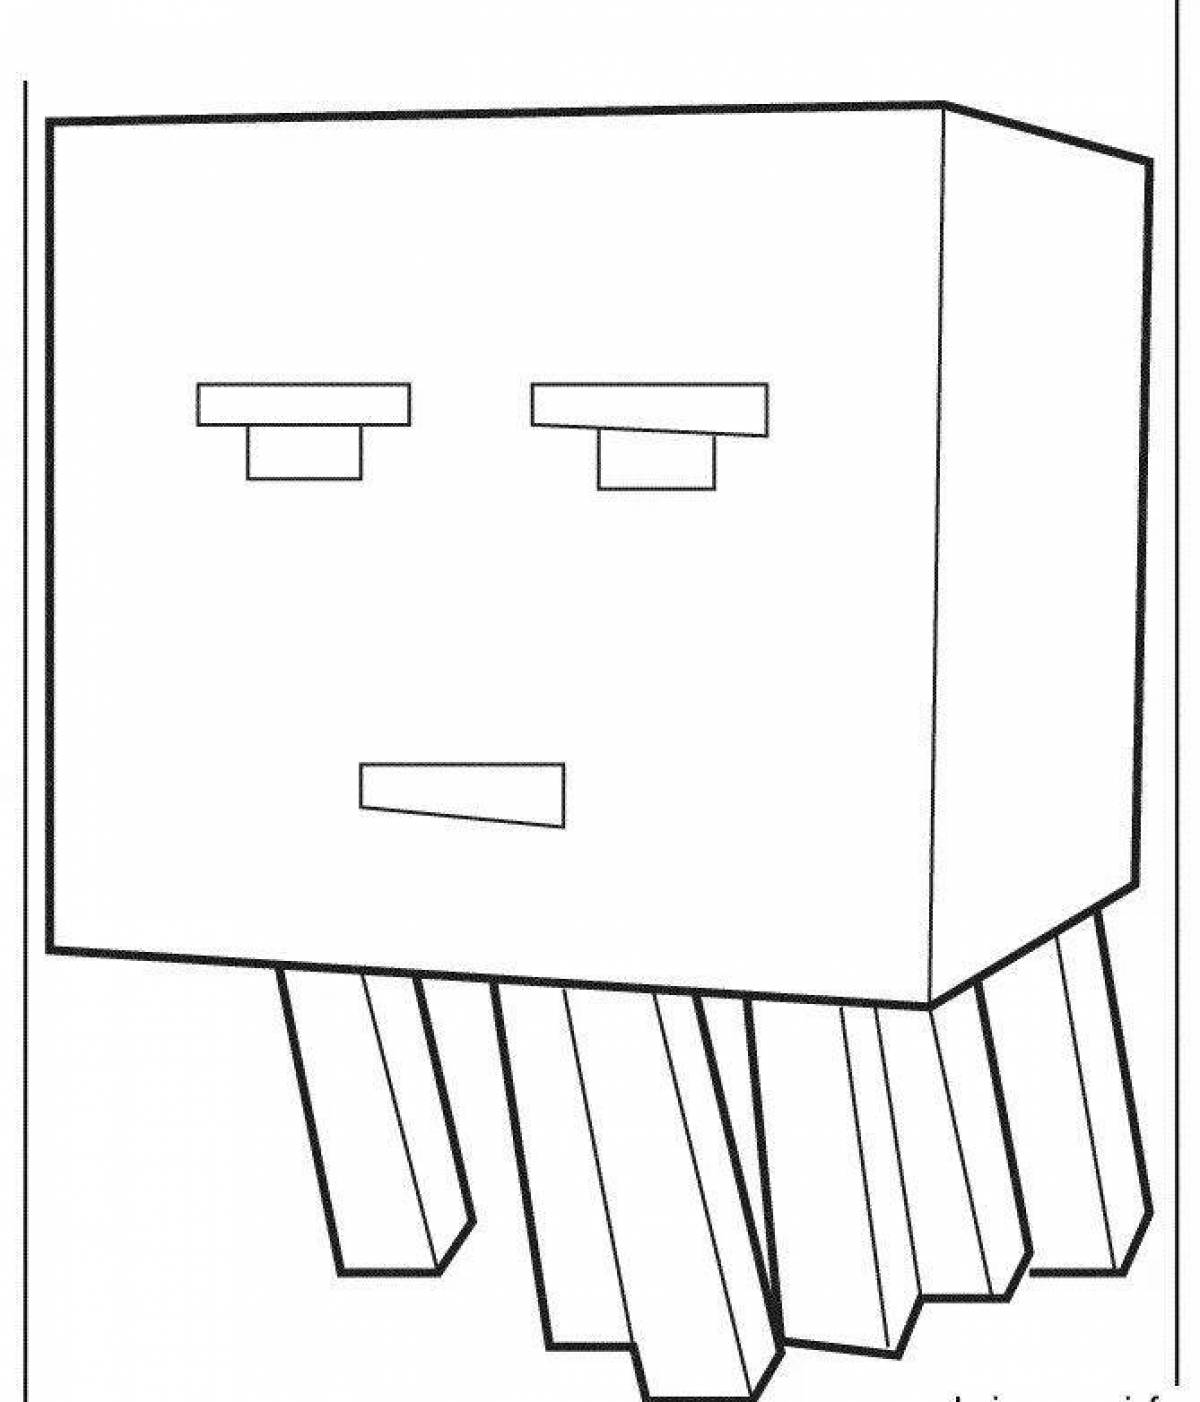 Minecraft resident coloring page